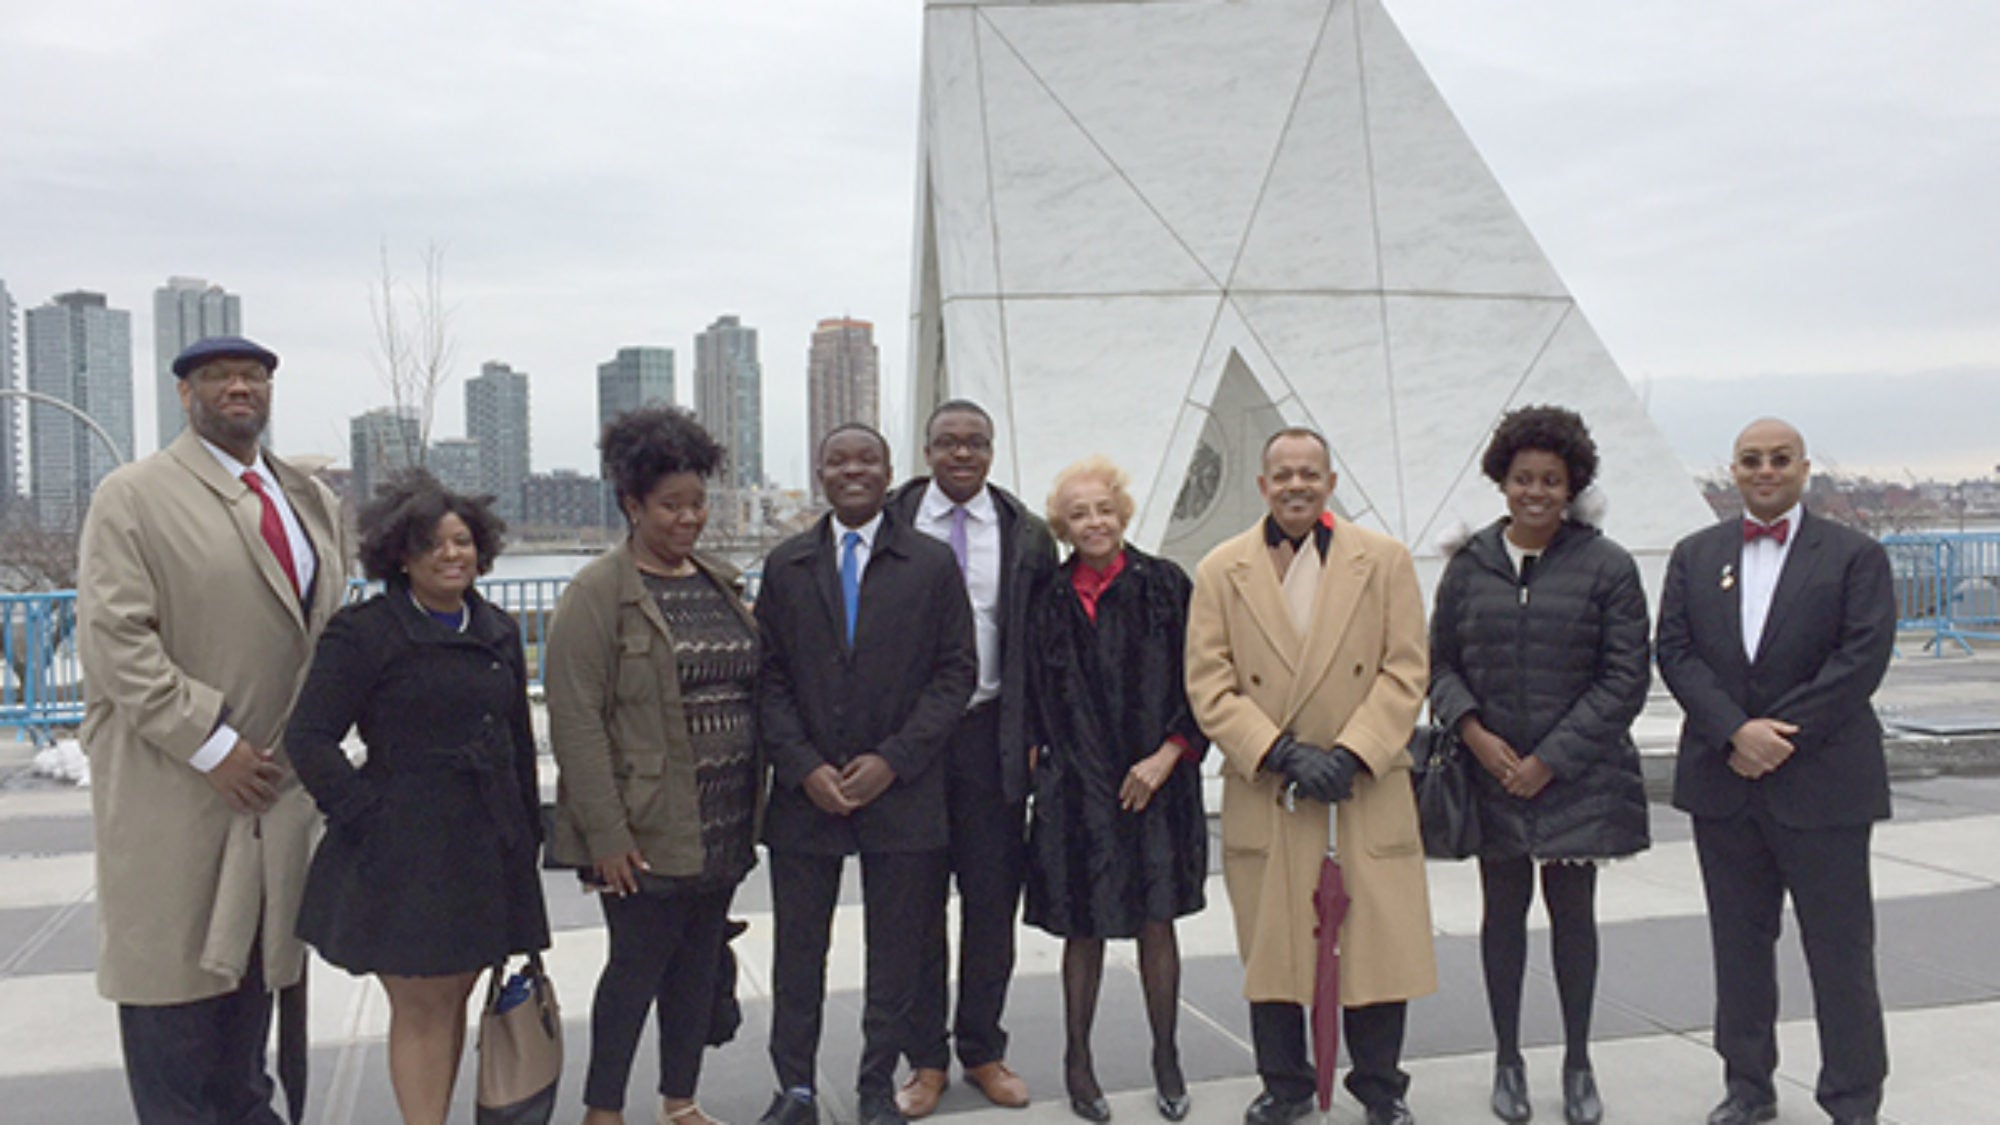 Descendants and other members of the Georgetown community stand before a sculpture at the United Nations in New York